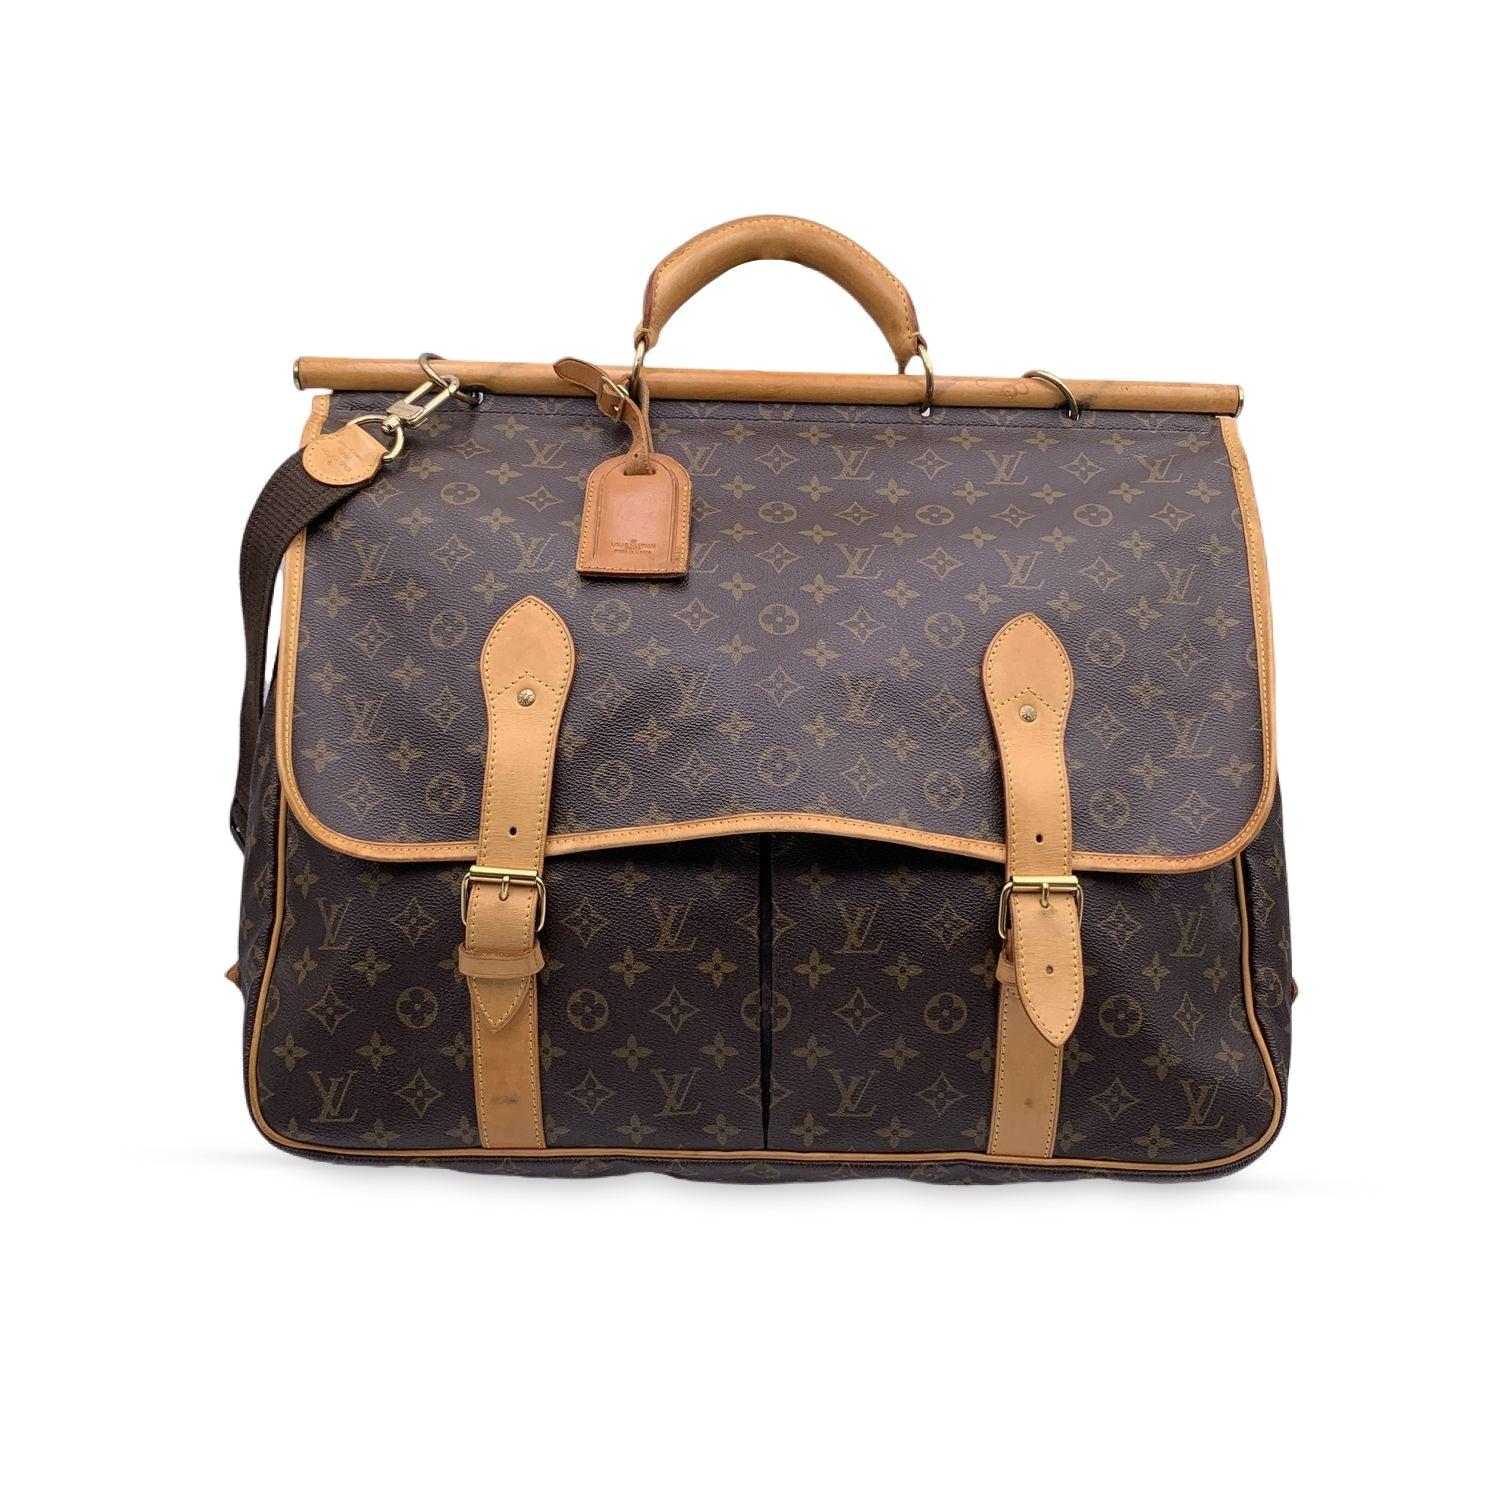 Louis Vuitton Chasse Garment Bag in Monogram canvas. 2 internal compartments, one on each side. It features rounded handles and a removable and adjustable shoulder strap in fabric. Zip and buckle closure. Original Louis Vuitton padlock attached to